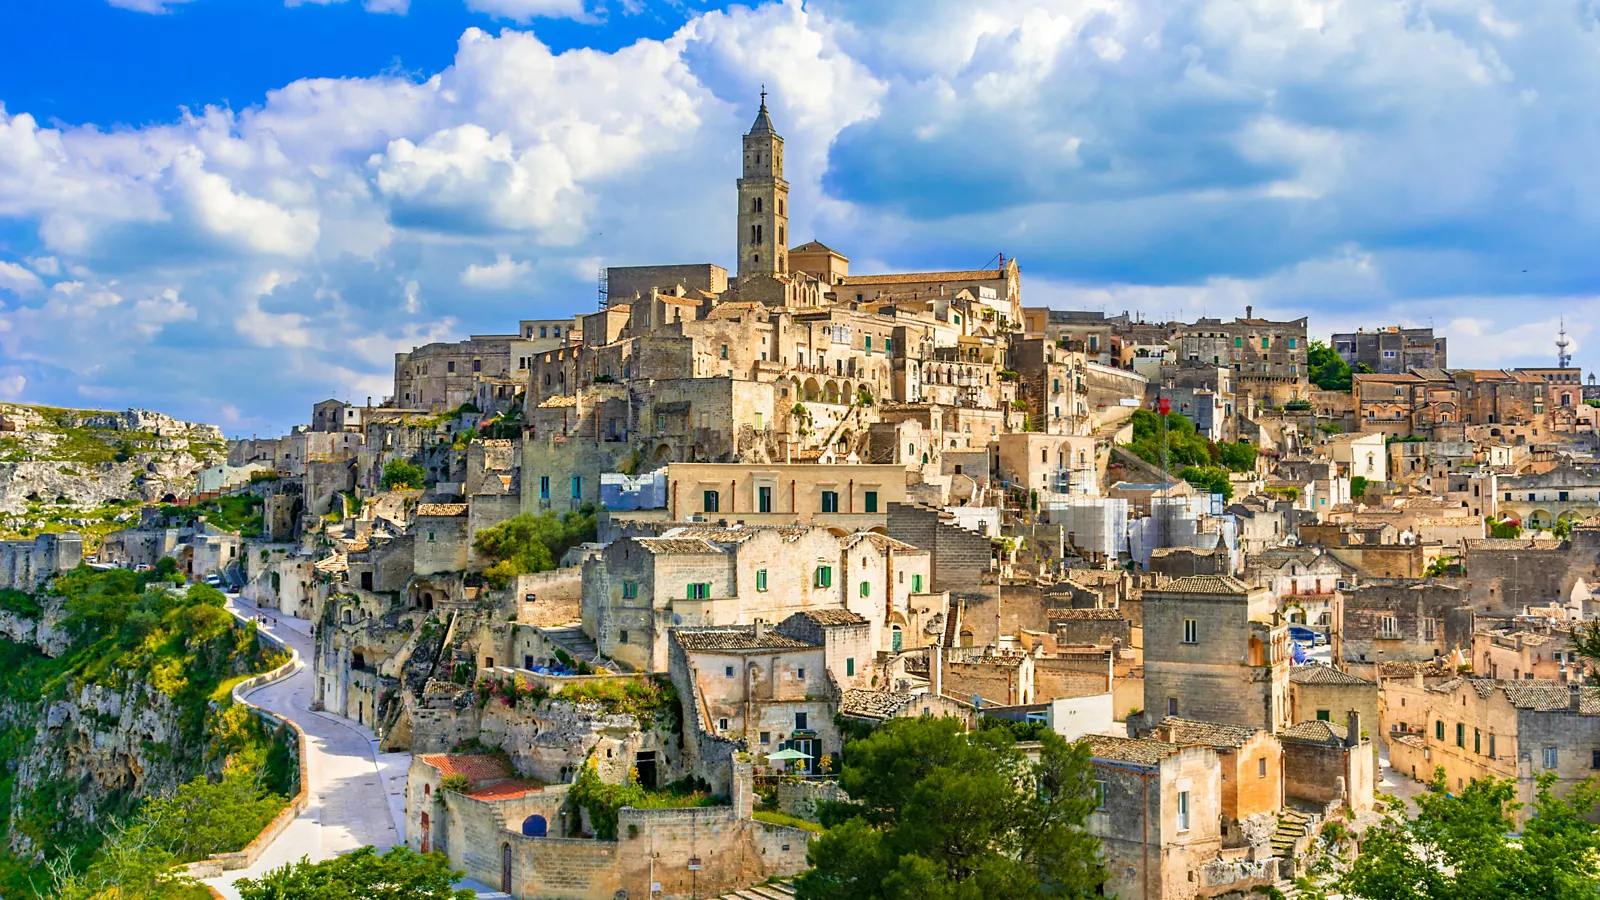 20210406102756 Matera Giorno Basilicata Gettyimages 971736354 2?wid=1600&hei=900&fit=constrain,1&fmt=webp